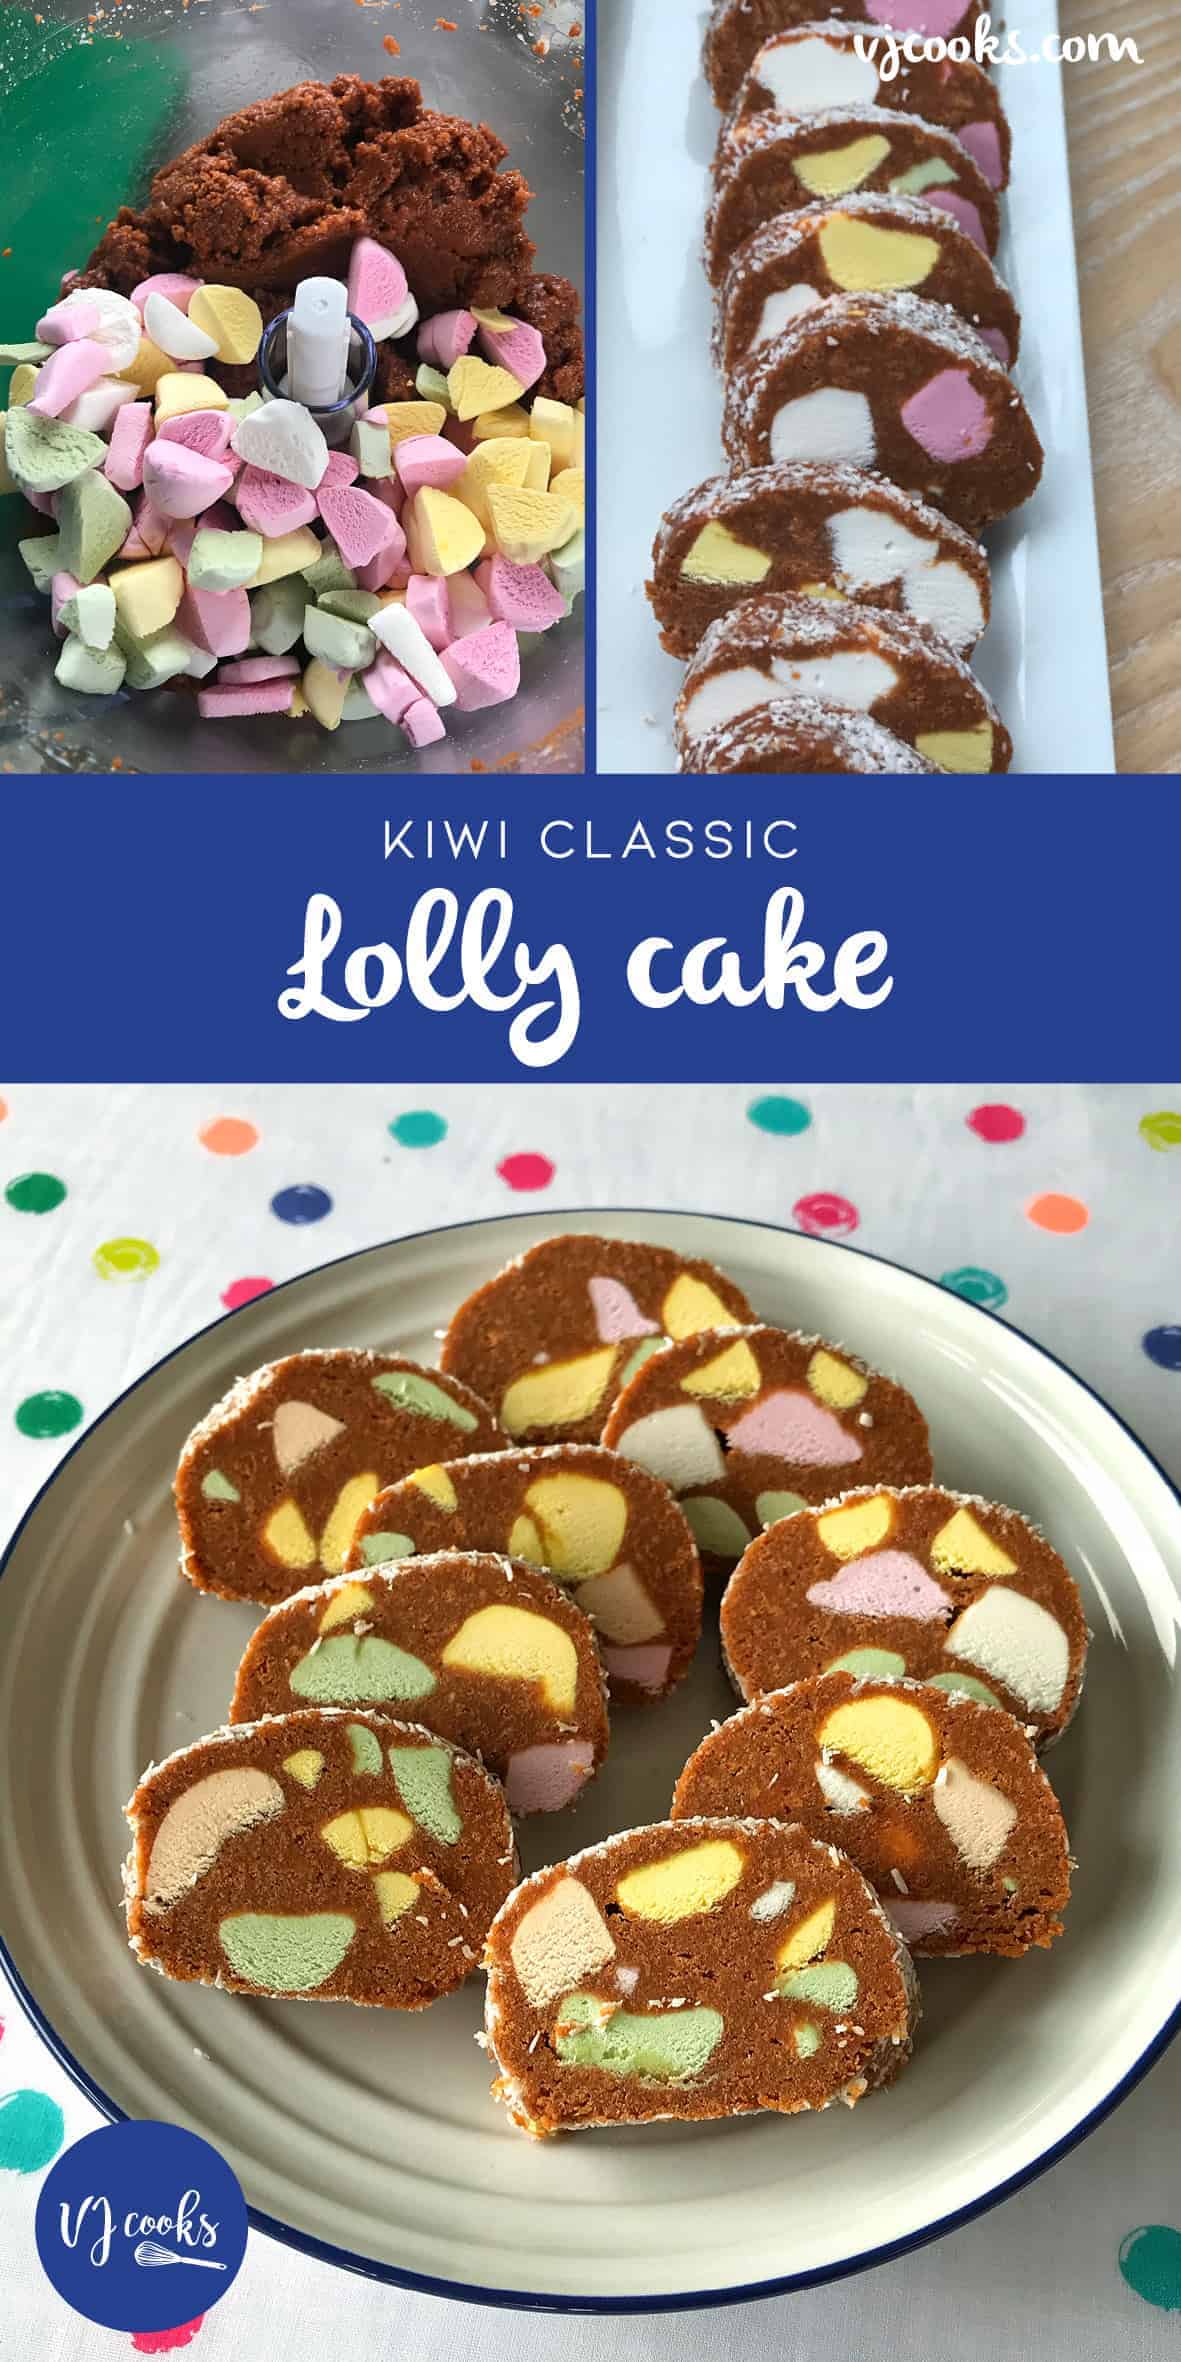 Lolly cake recipe pin from VJ cooks 